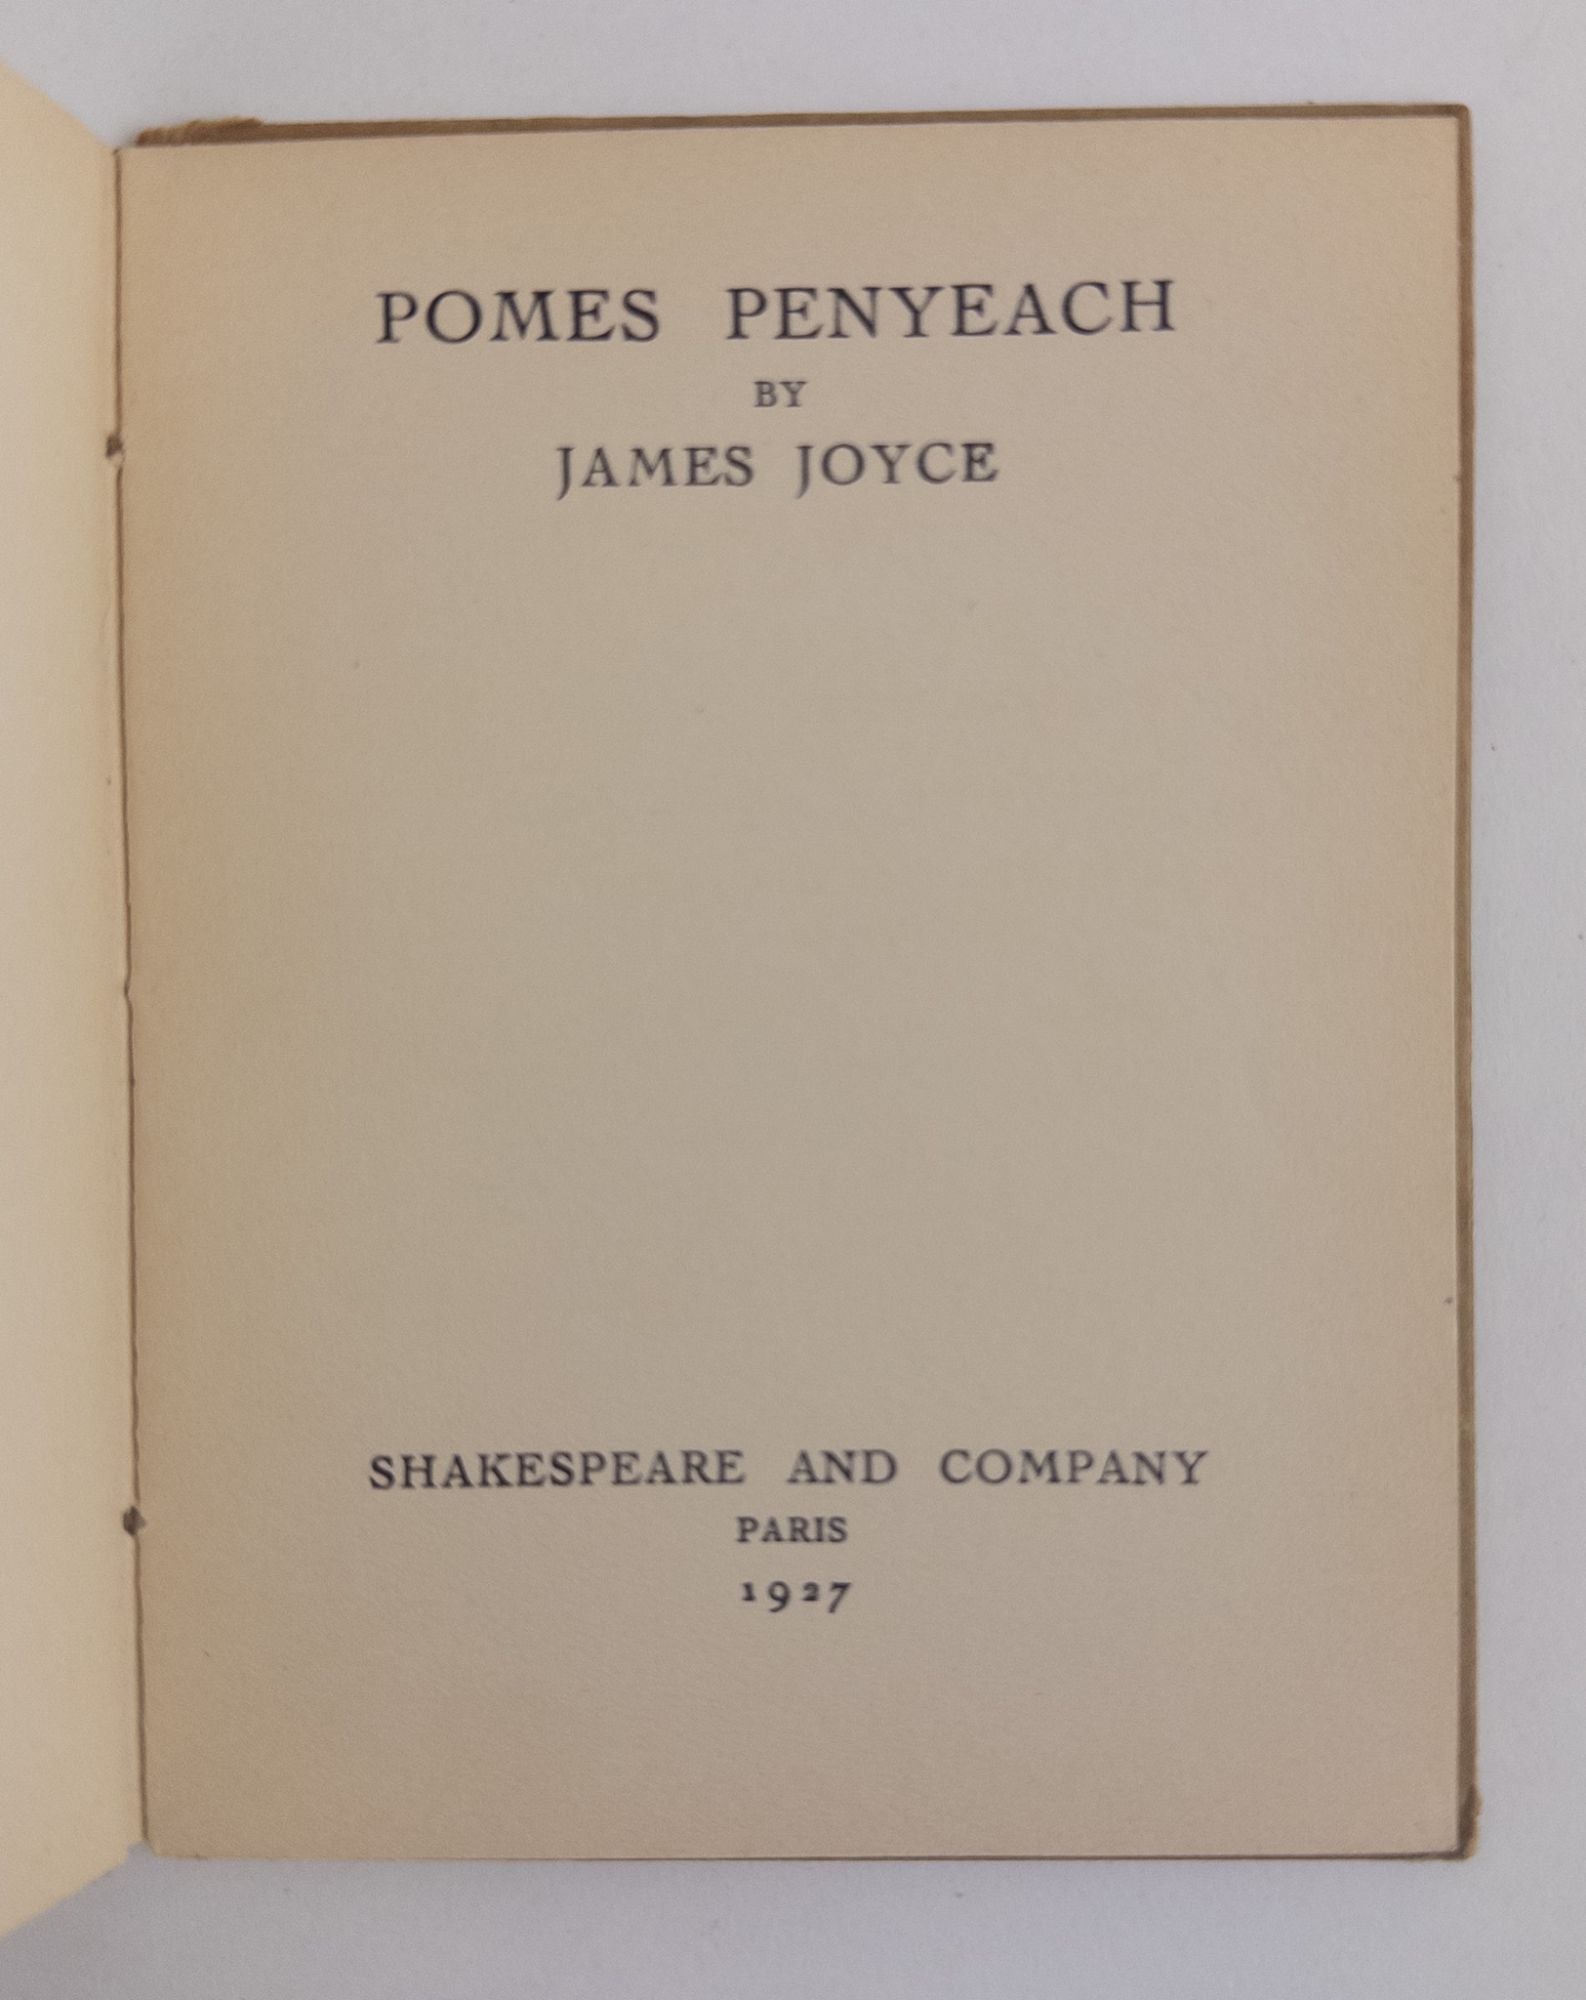 Product Image for POMES PENYEACH